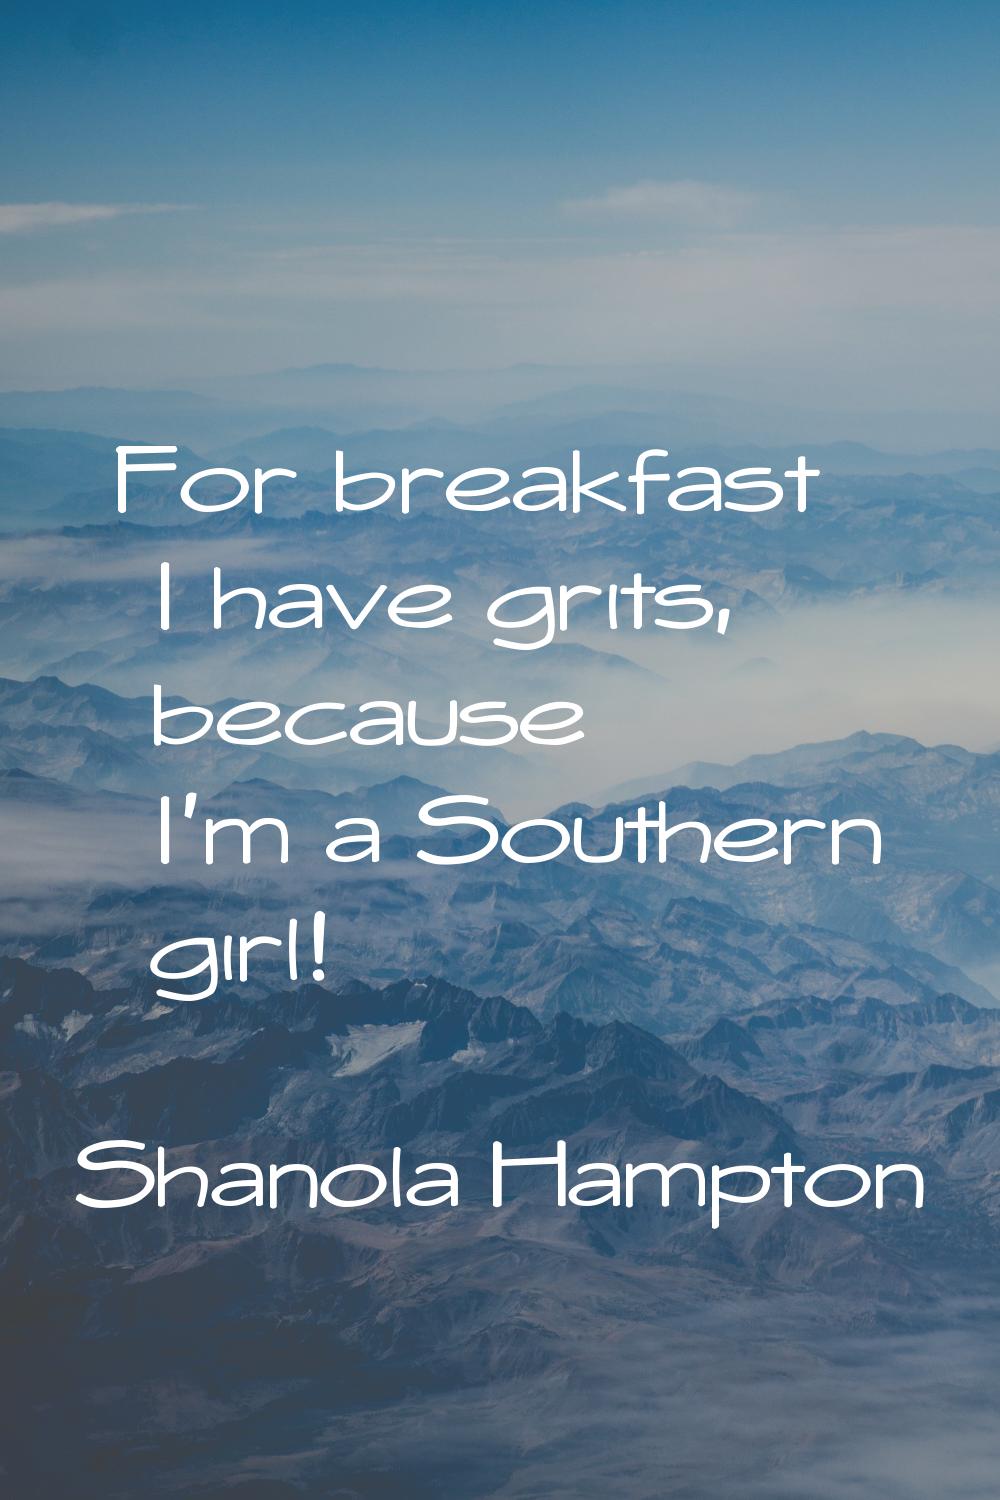 For breakfast I have grits, because I'm a Southern girl!